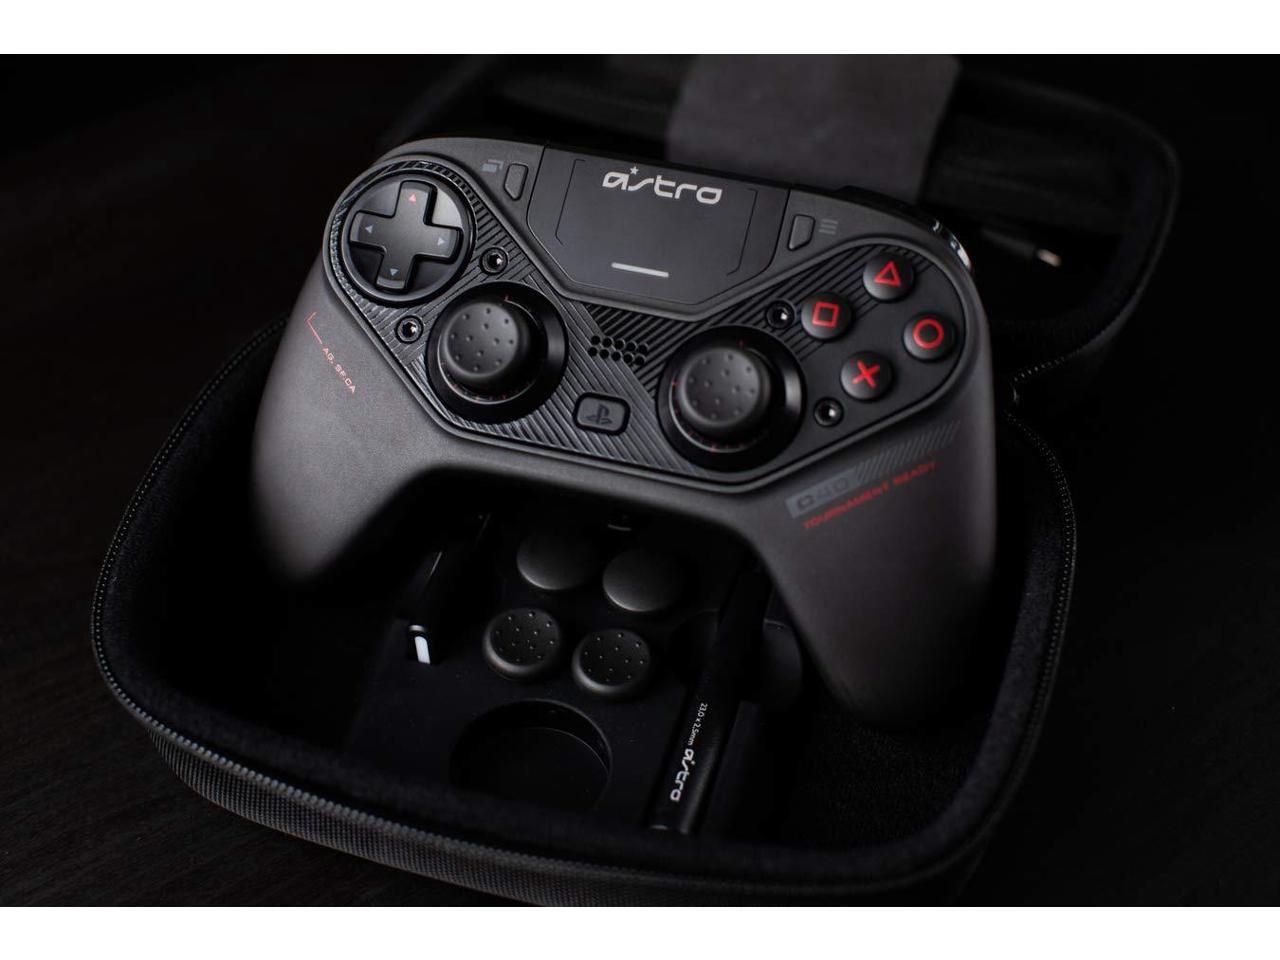 c40 tr wireless gaming controller for playstation 4